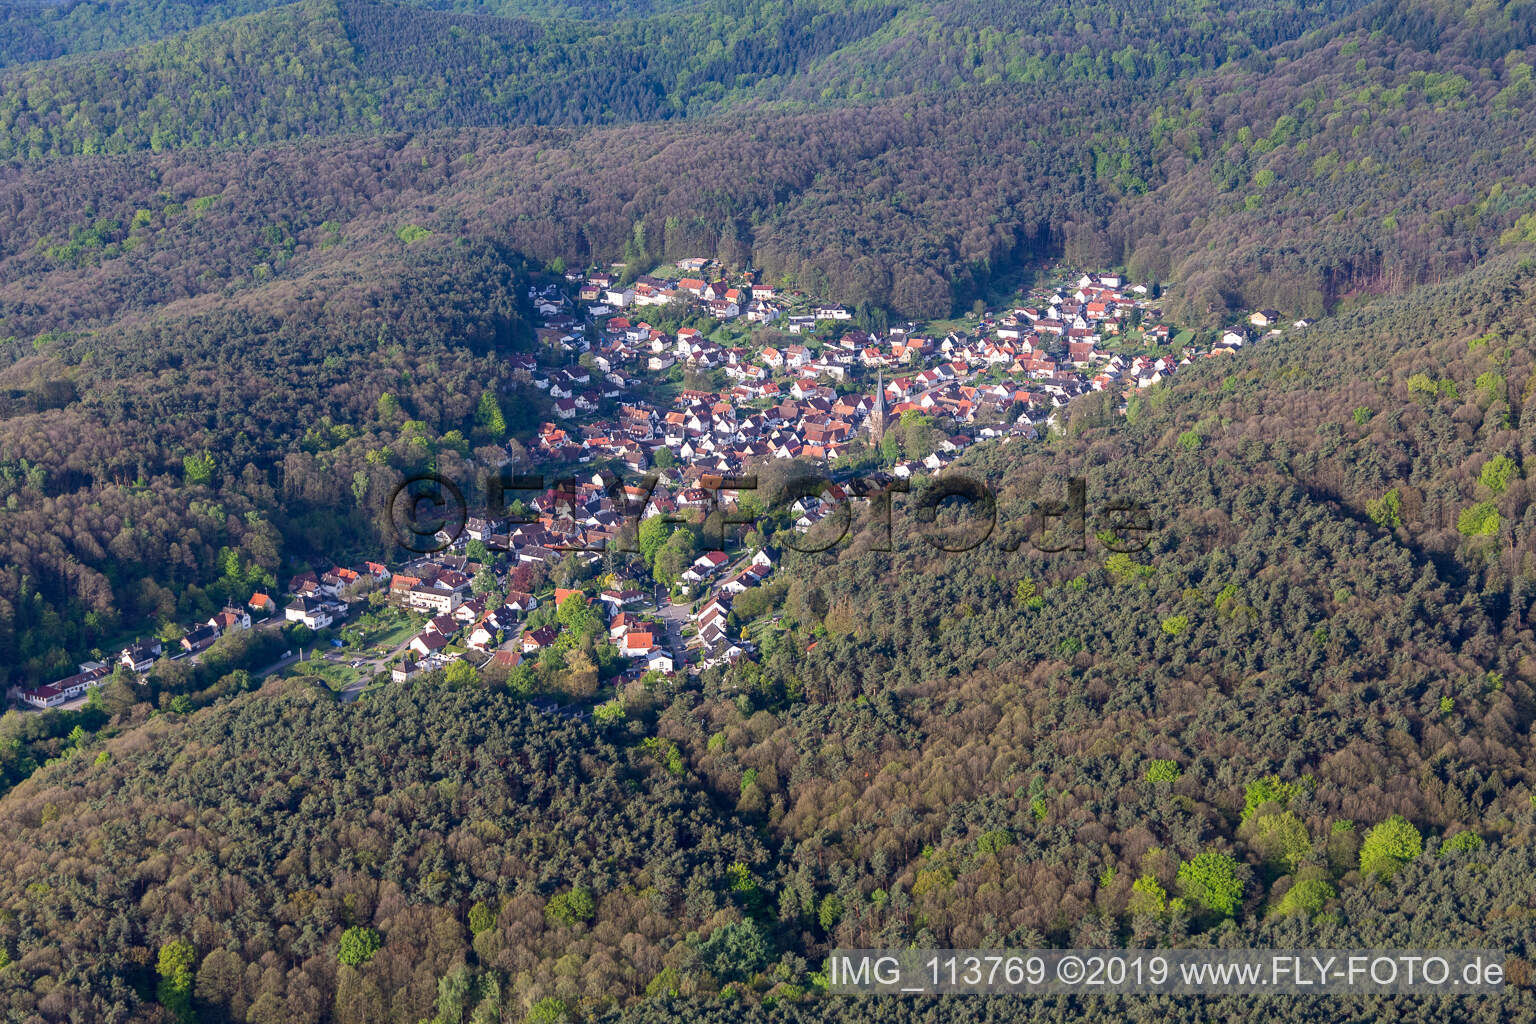 Drone image of Dörrenbach in the state Rhineland-Palatinate, Germany